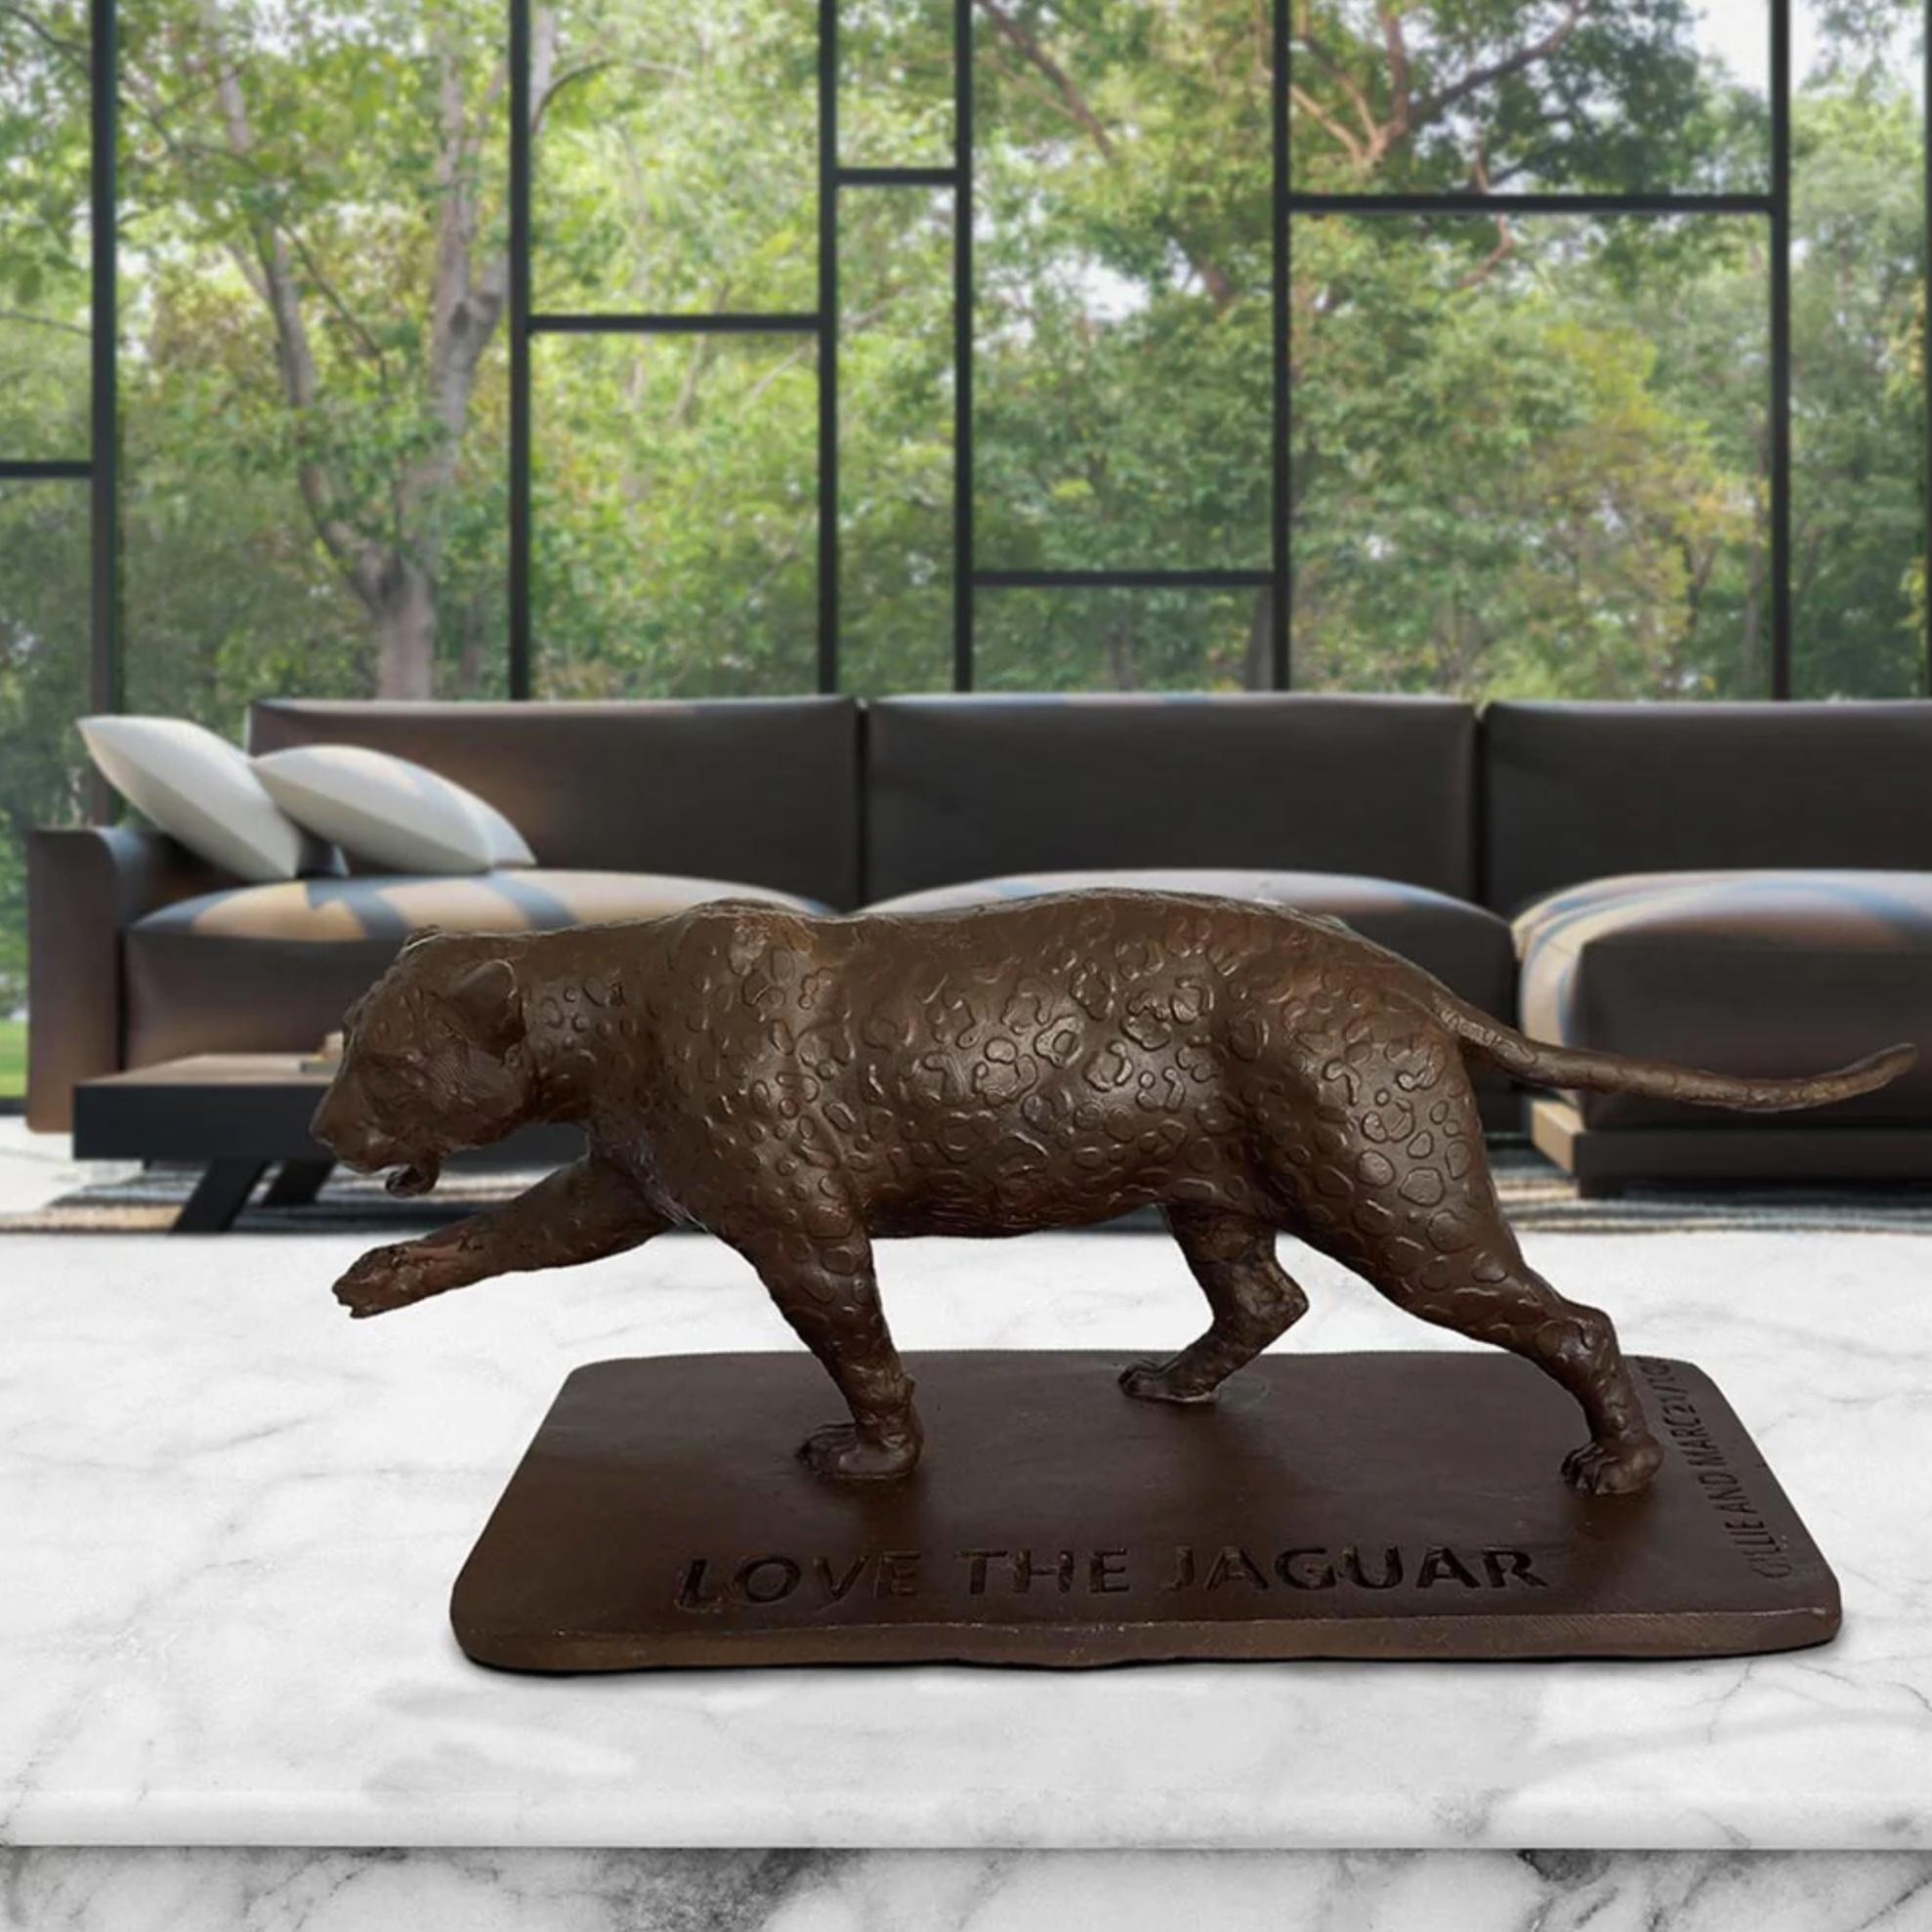 Title: Love the Jaguar
Authentic Bronze Sculpture

This authentic bronze sculpture titled 'Love the Jaguar' by artists Gillie and Marc has been meticulously crafted in bronze. It features the Jaguar marching and comes in a limited-edition series of